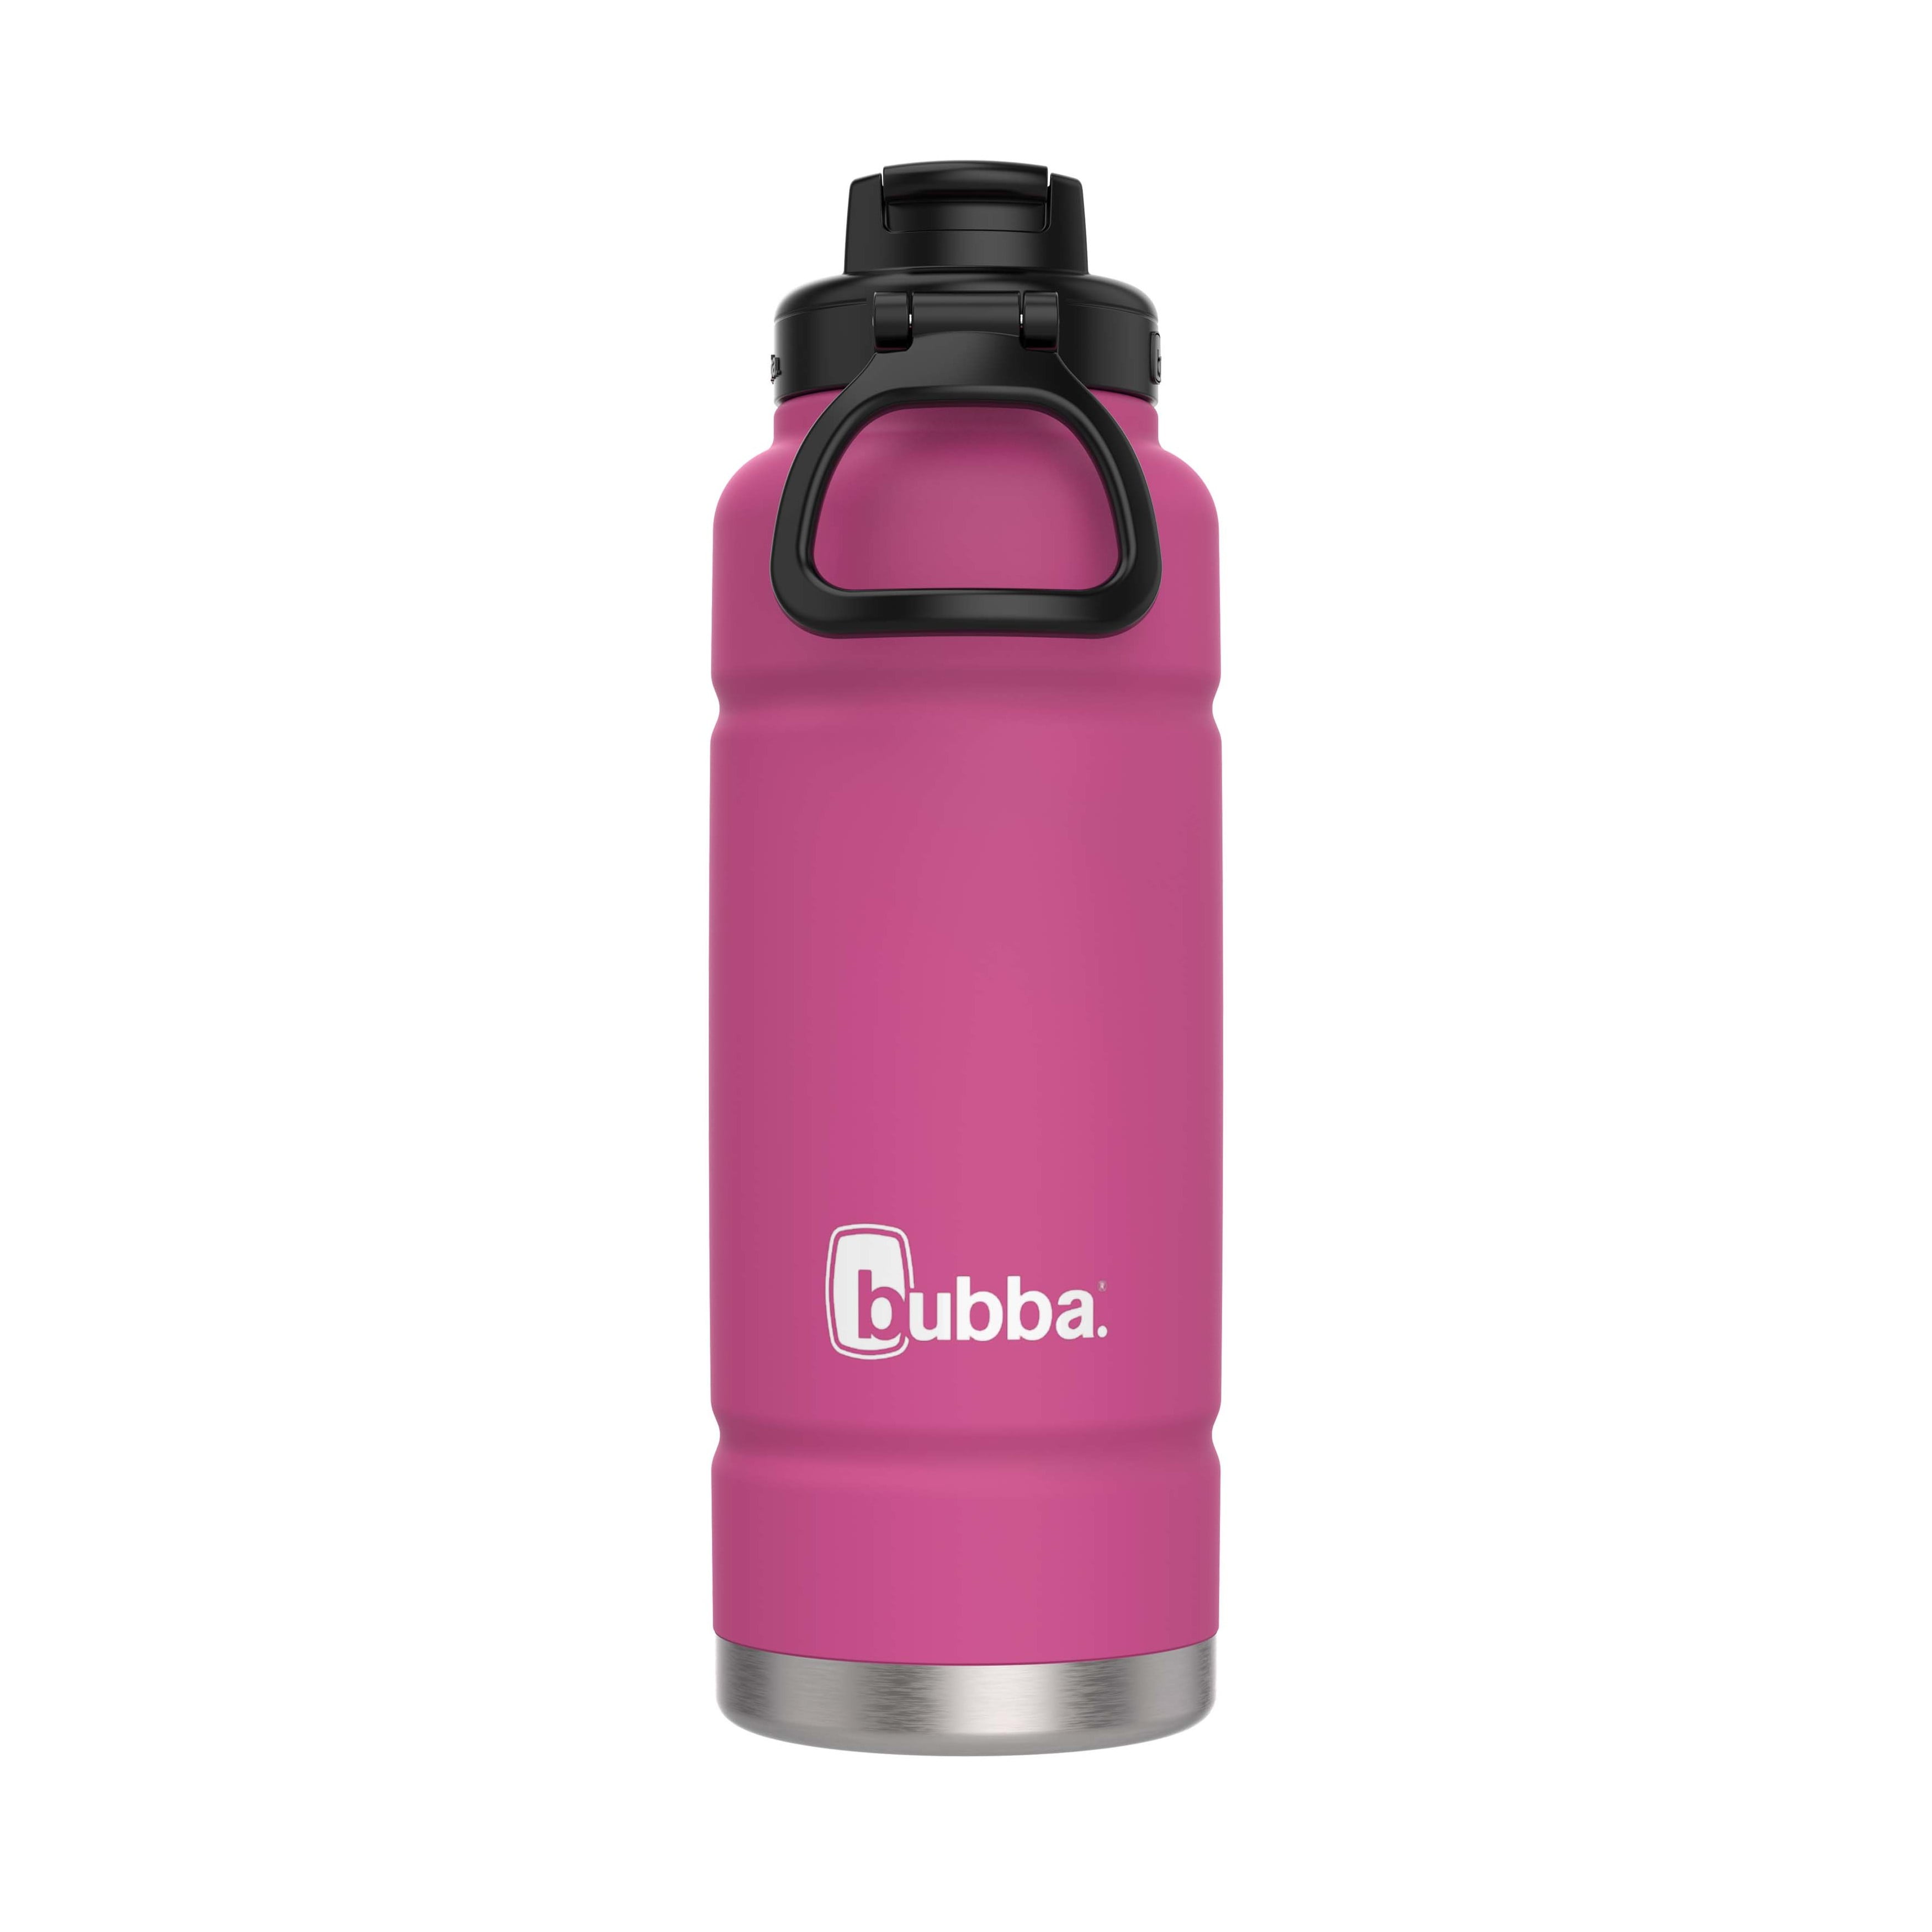 bubba Trailblazer Insulated Stainless Steel Water Bottle with Straw Lidin  Teal, 40 oz., Rubberized 